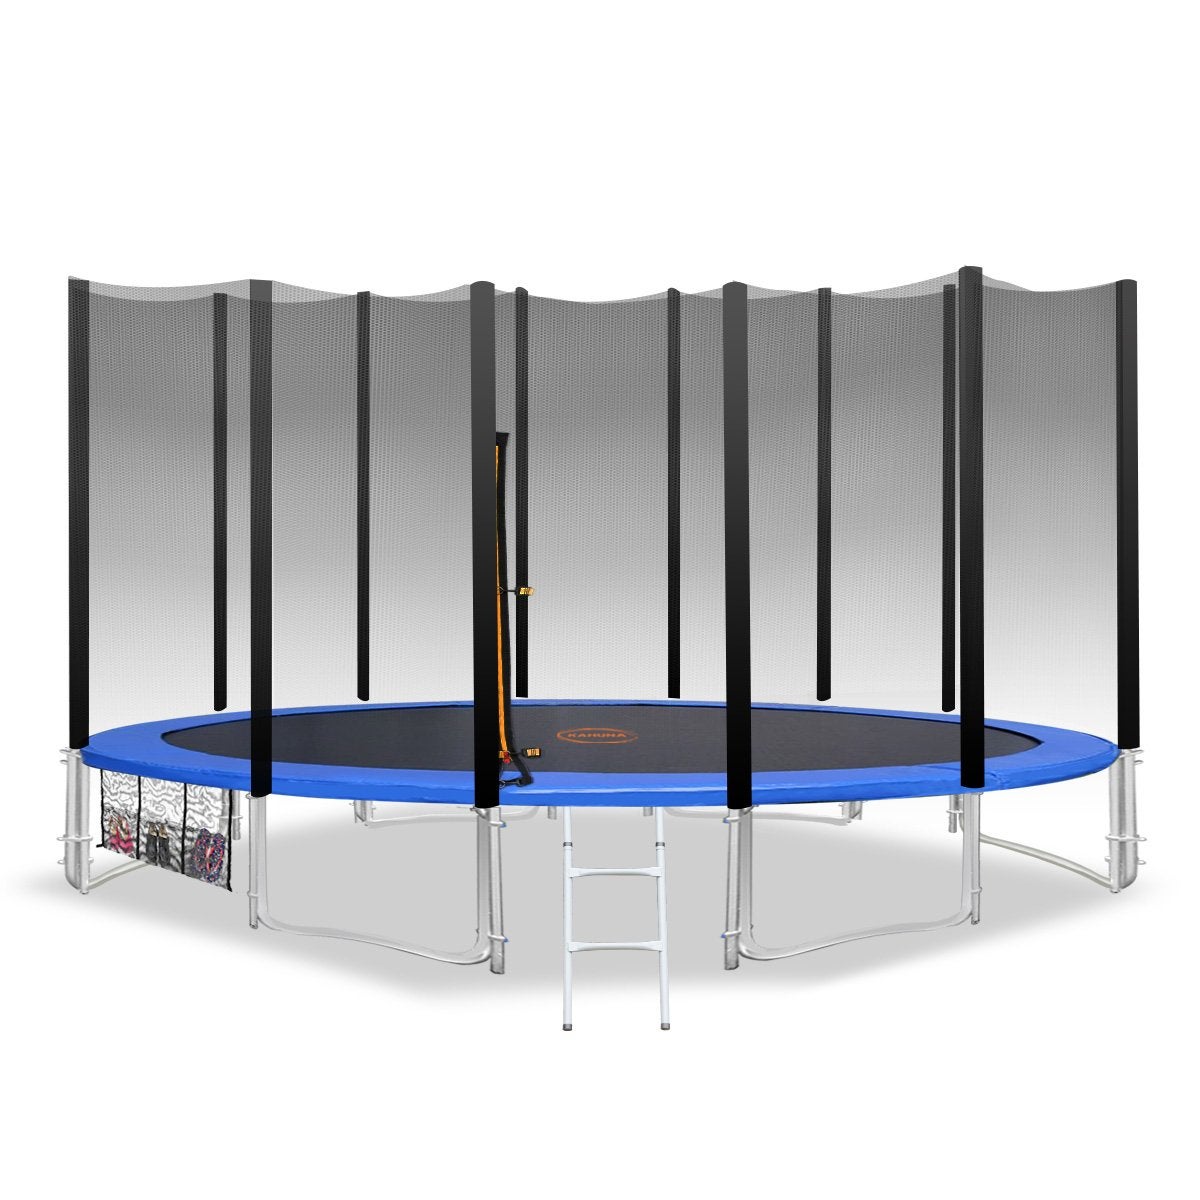 Blizzard 14 Ft Trampoline With Net - Blue